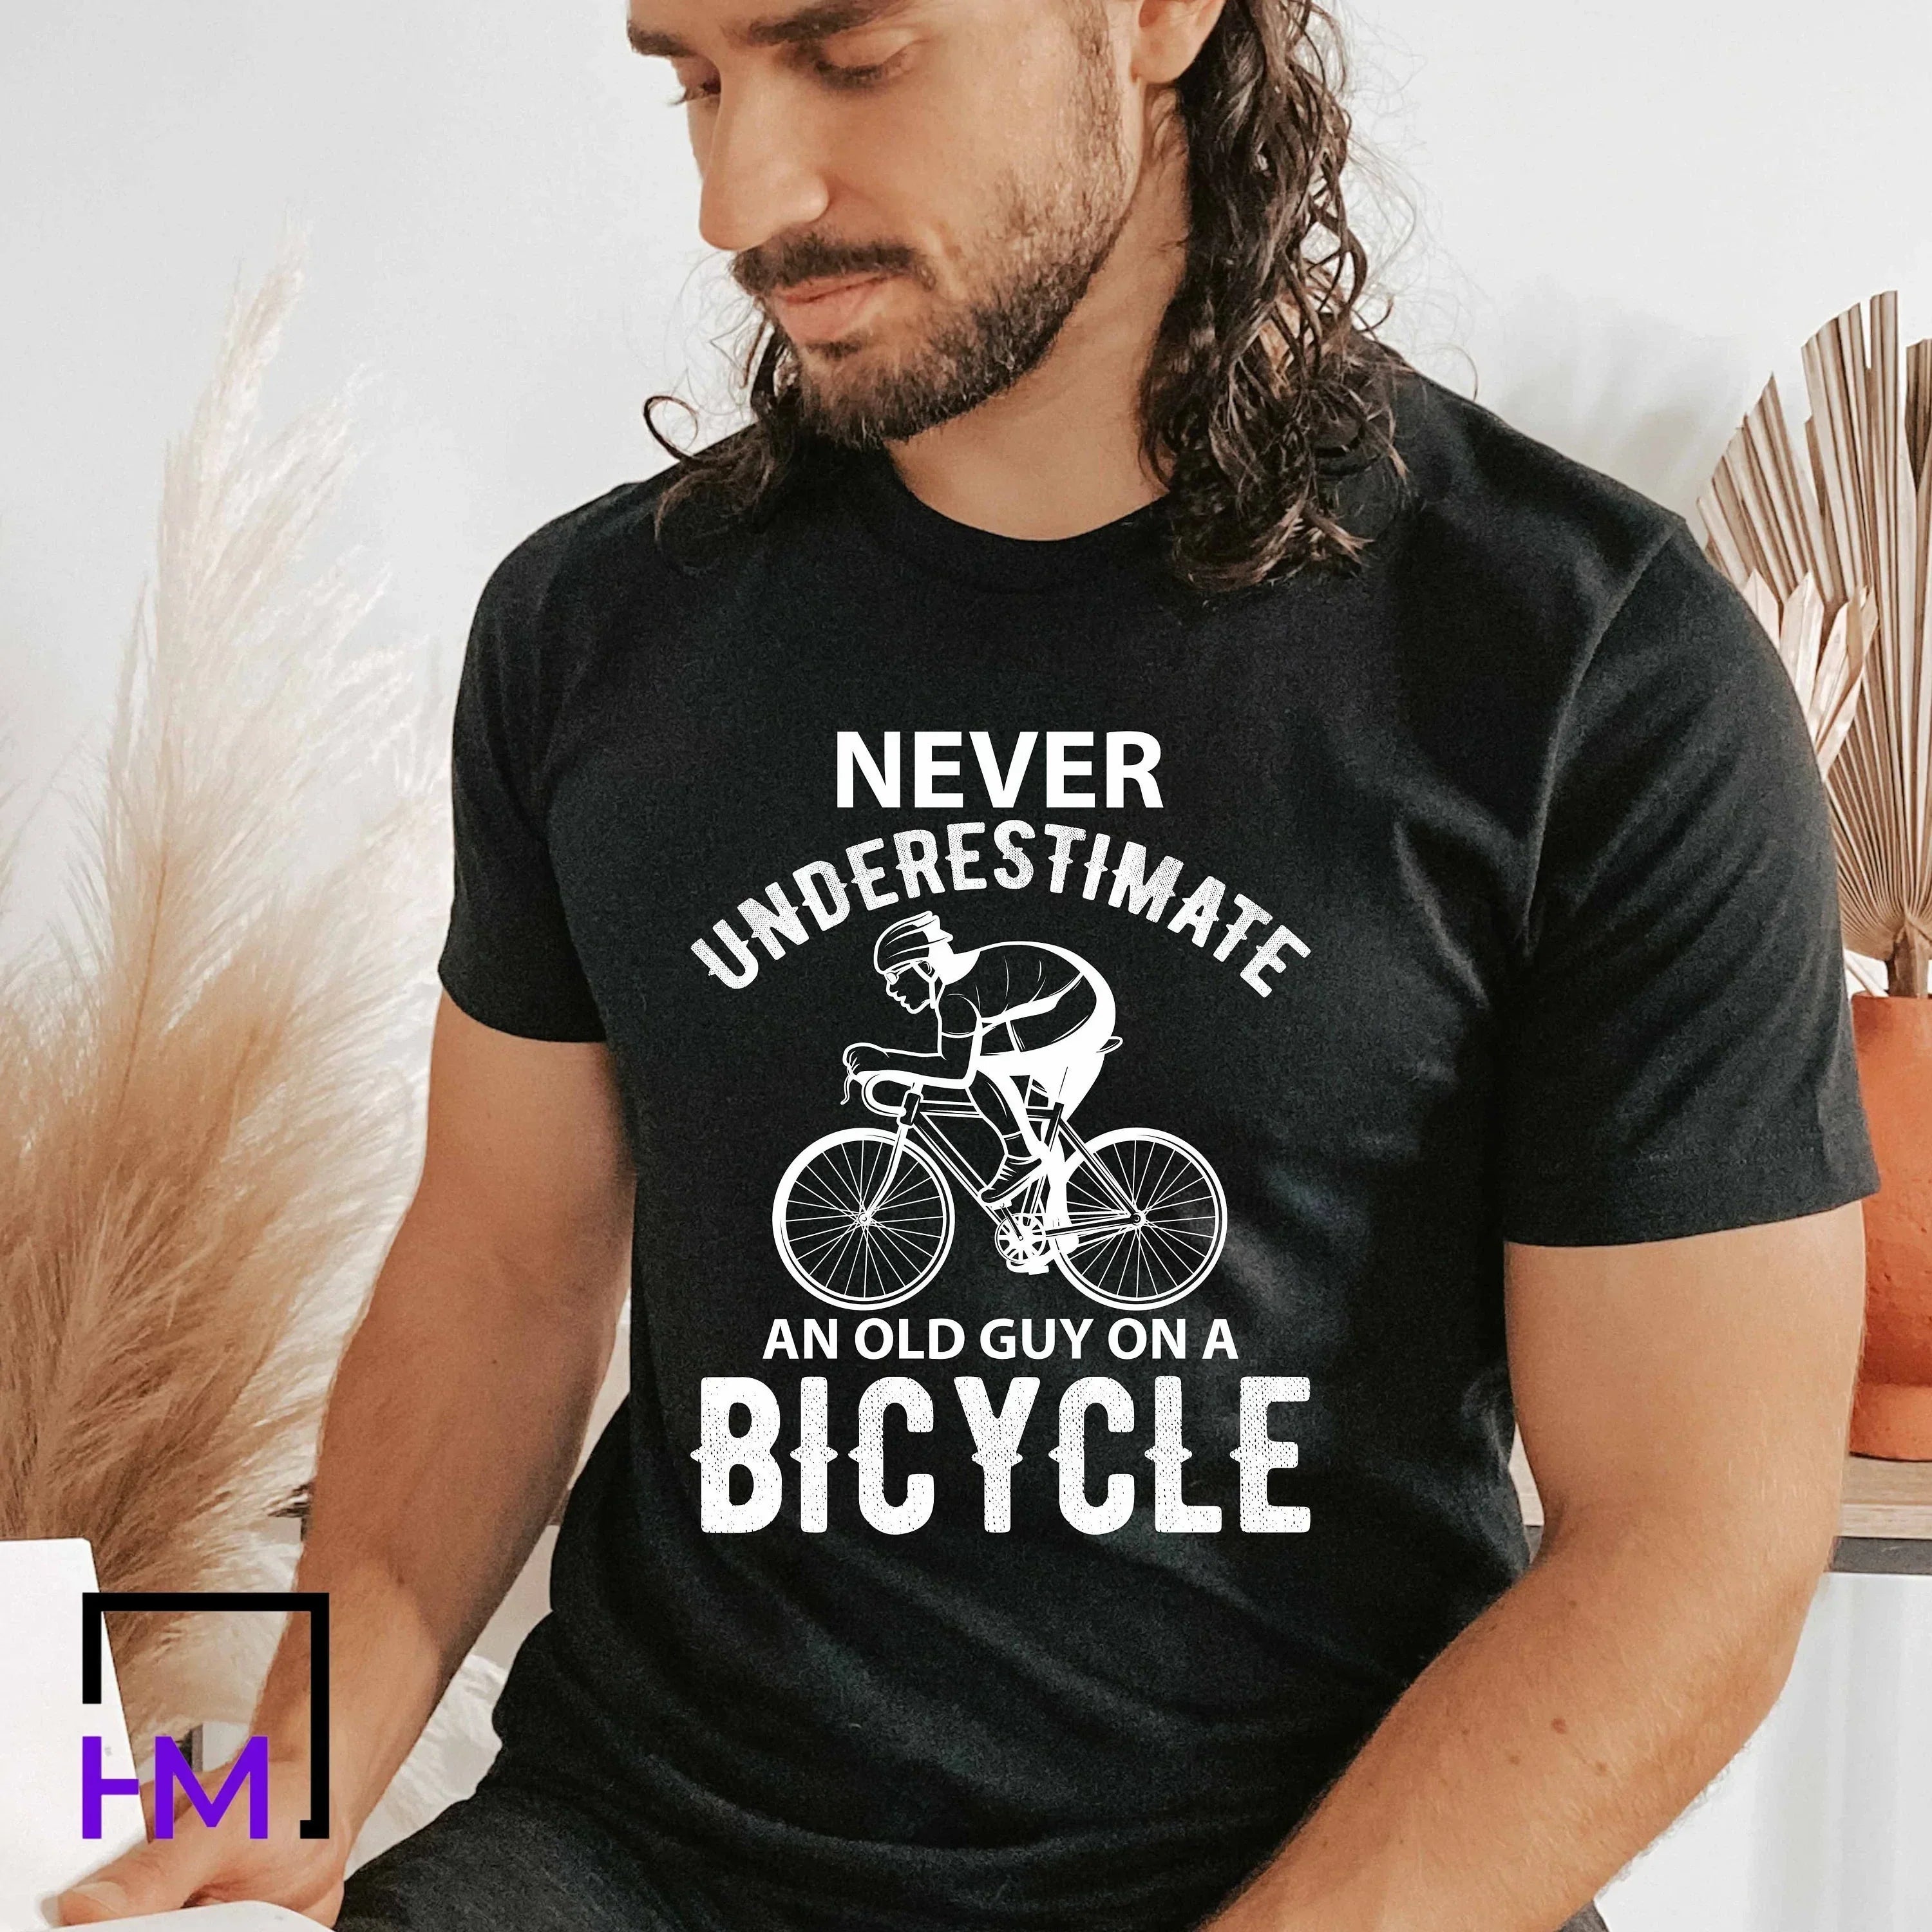 Great Gifts for Cyclists | Gifts, Cycling gifts, Best gifts